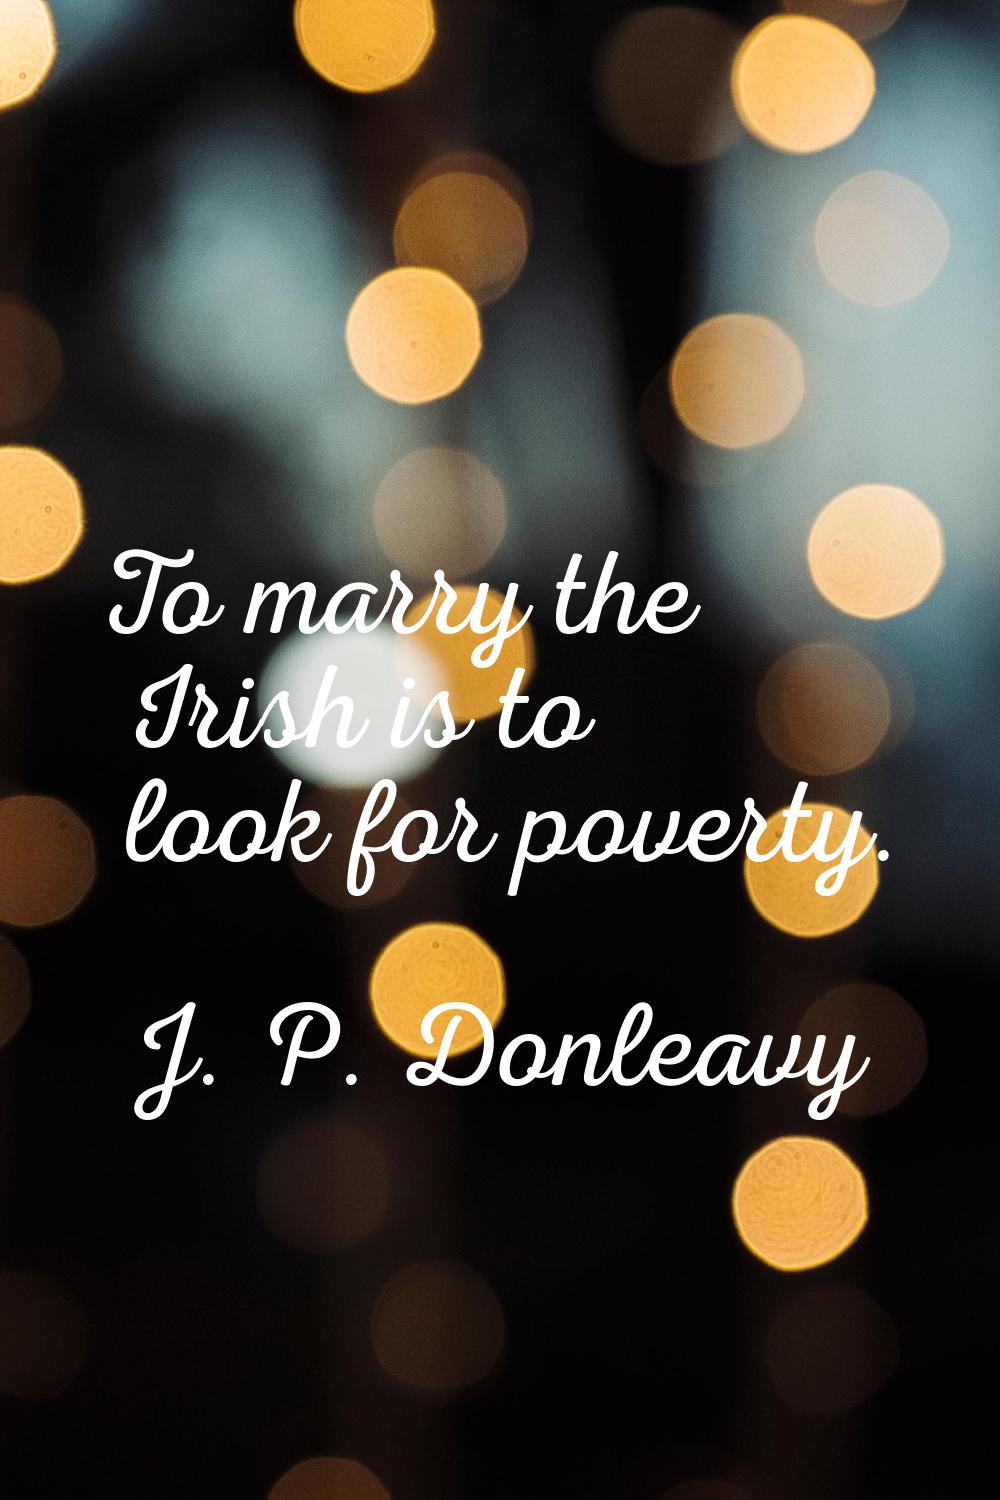 To marry the Irish is to look for poverty.